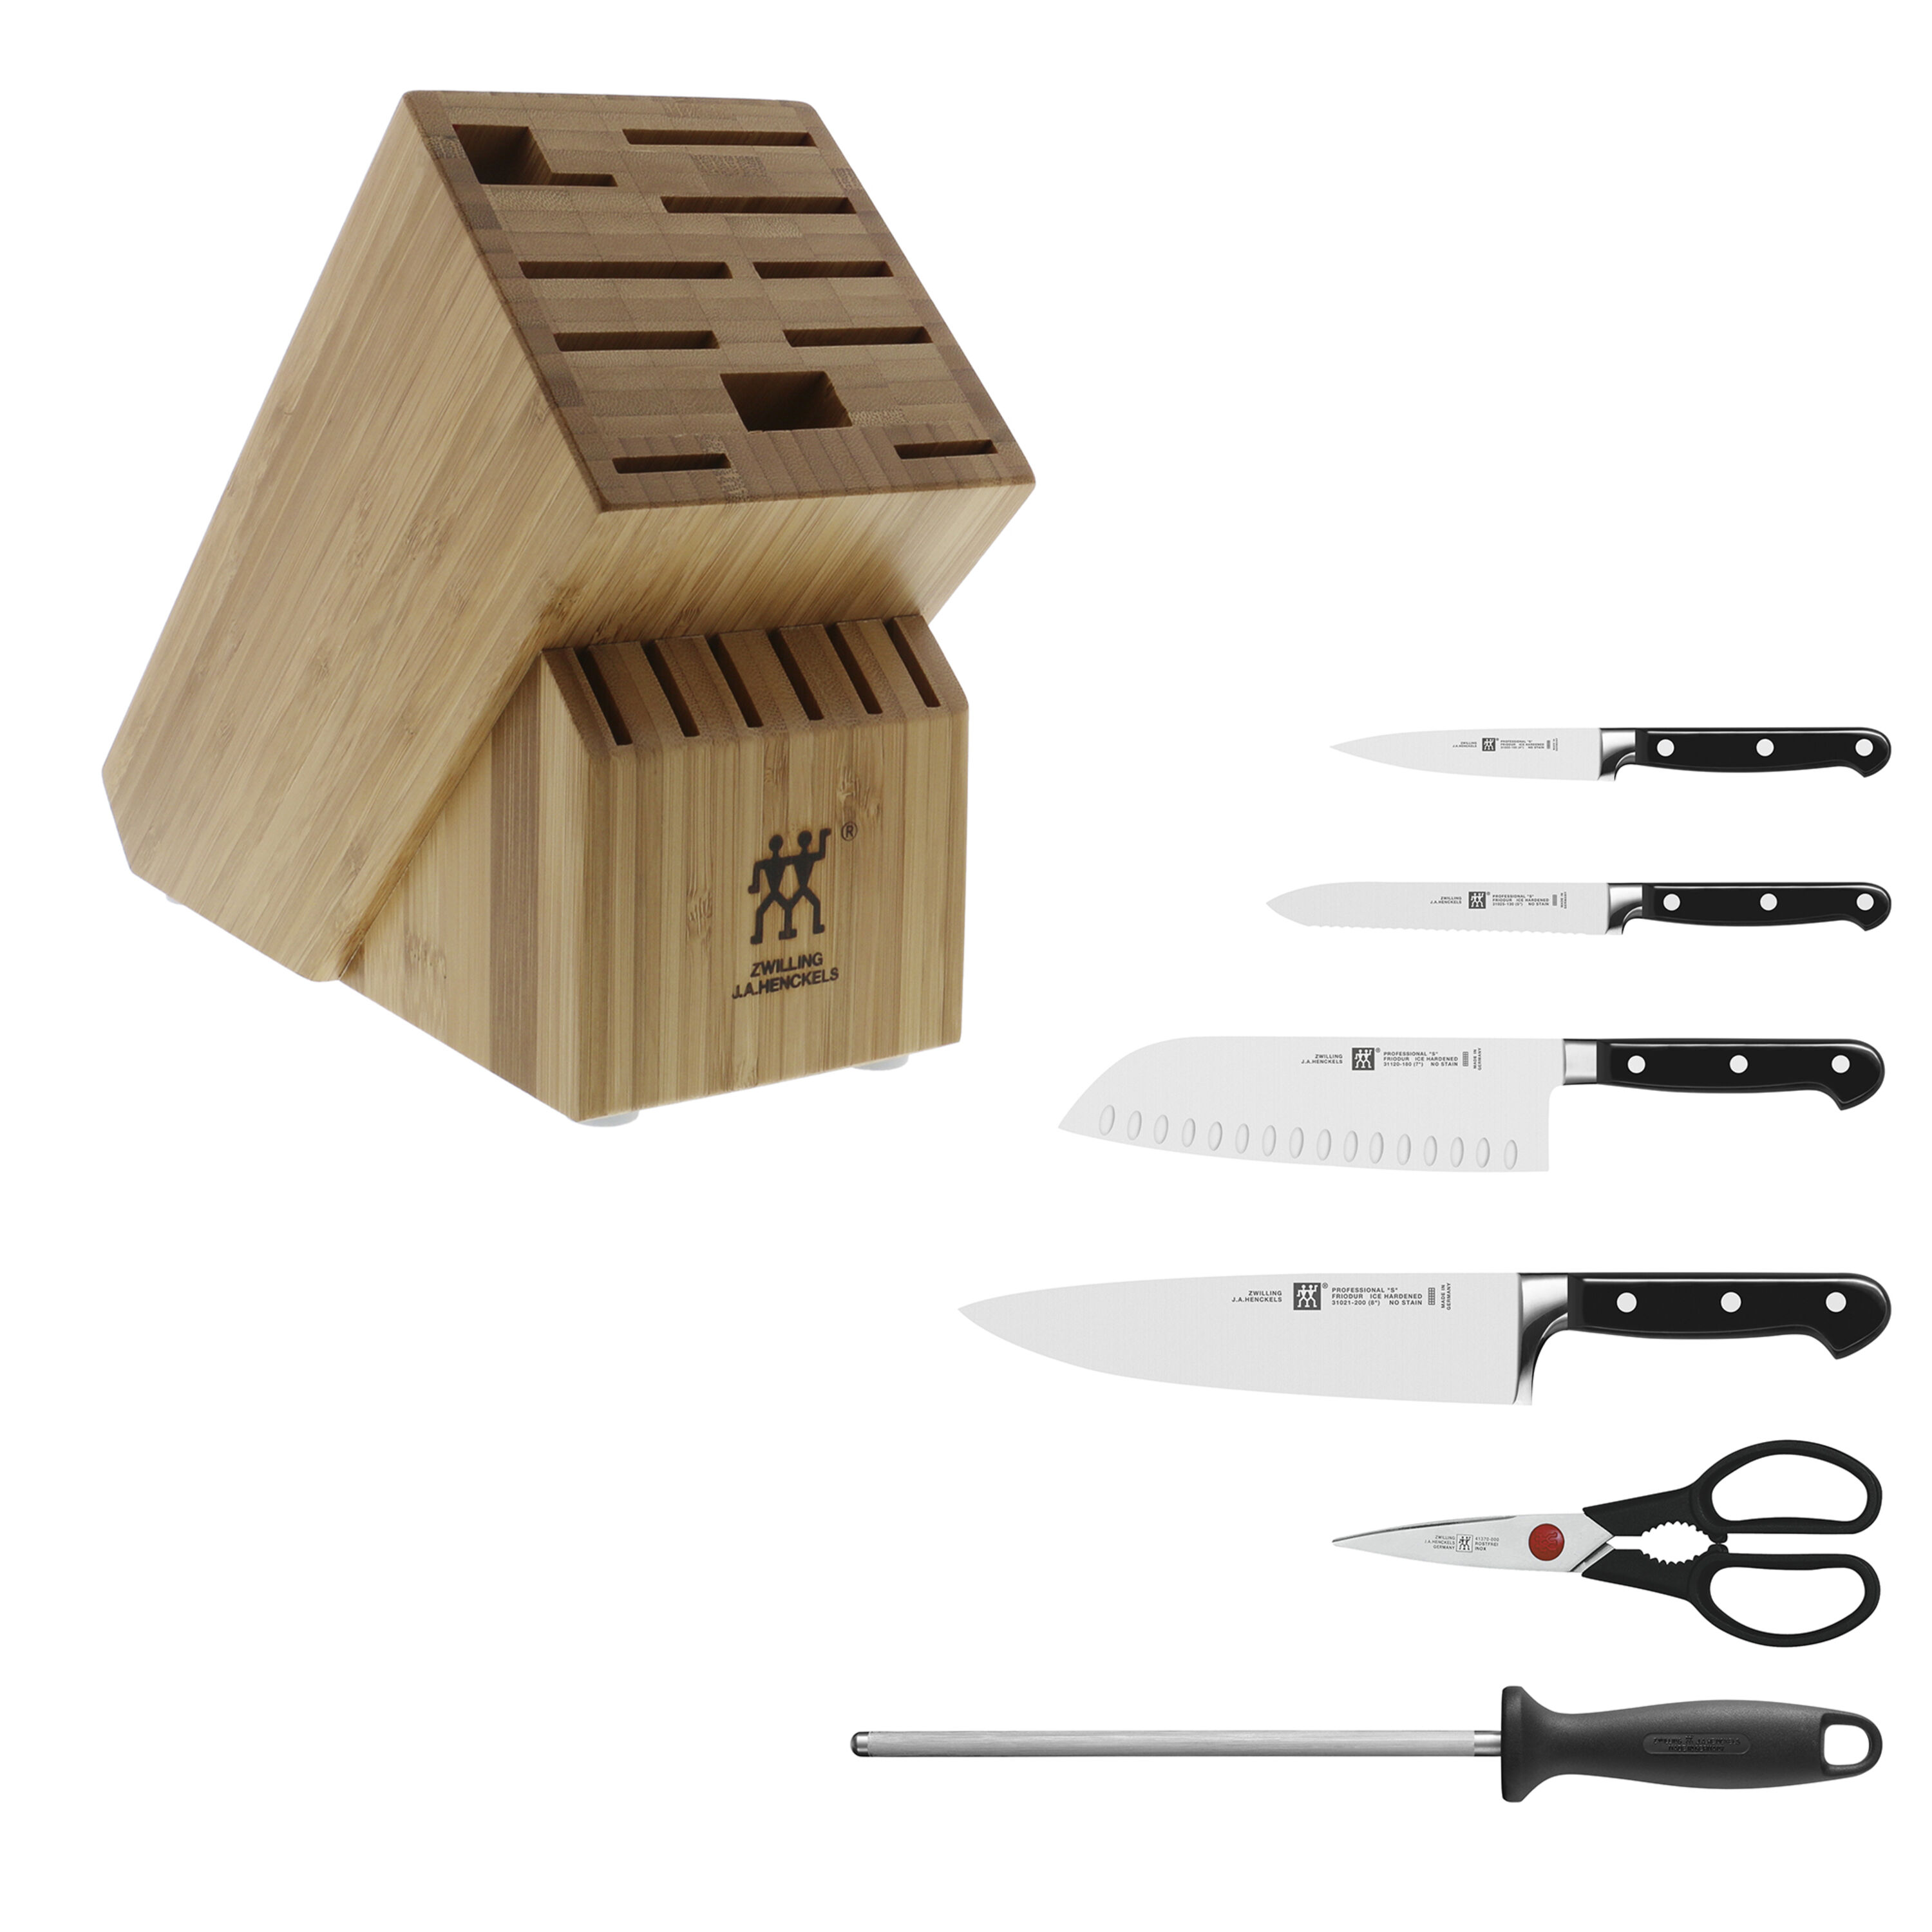 Zwilling 35645-000 Professional S knife set 2-piece